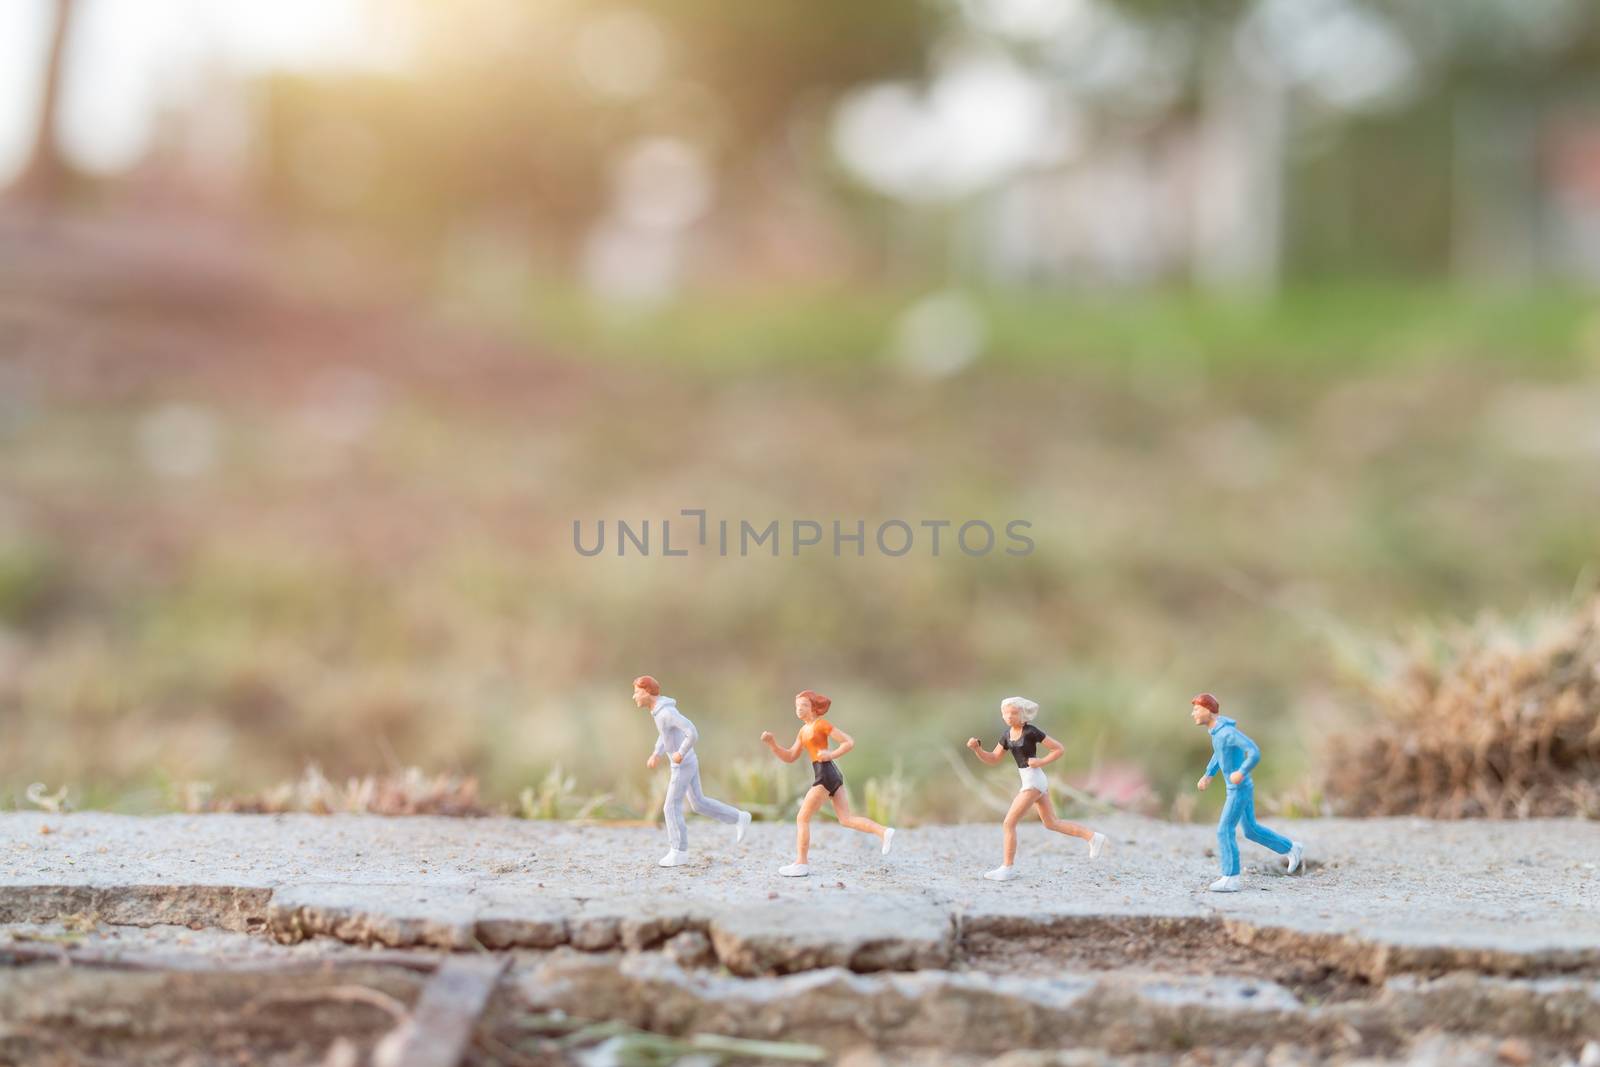 Miniature people : Running on the road with nature background , Health And lifestyle concepts